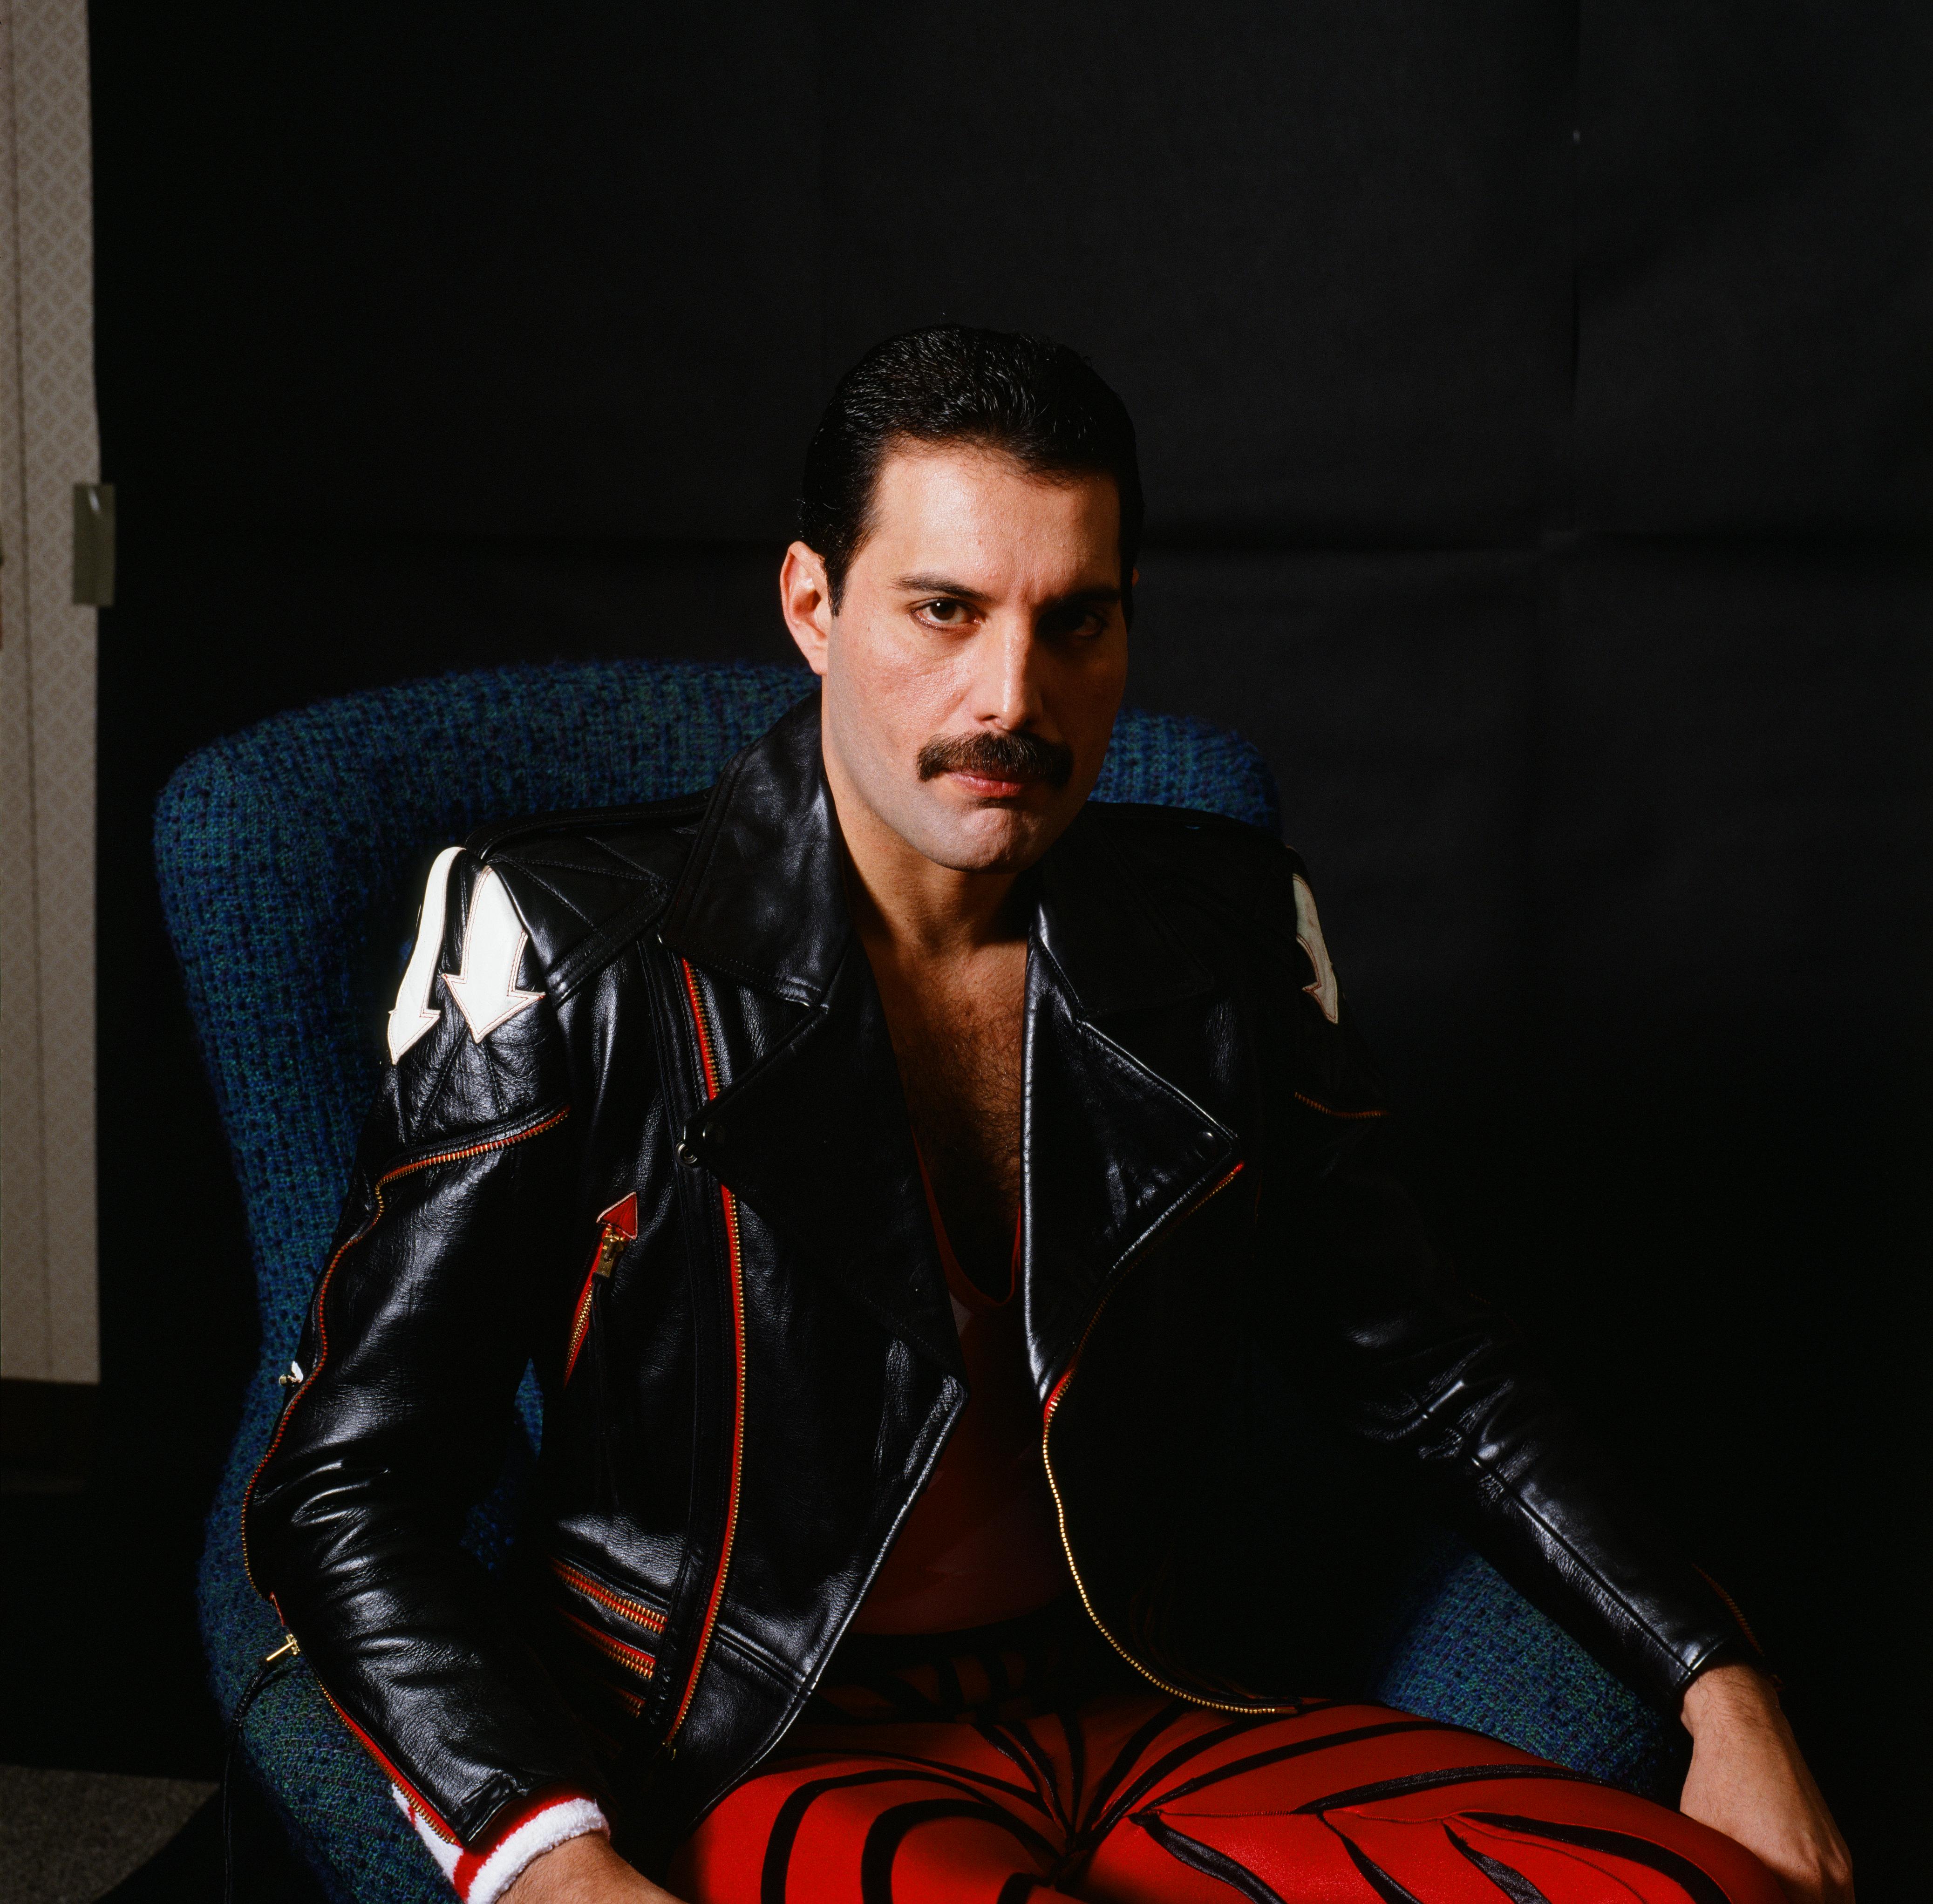 Freddie Mercury of Queen, portrait for Japanese music magazine 'Music Life', Tokyo, Japan , 1985. | Photo: Getty Images